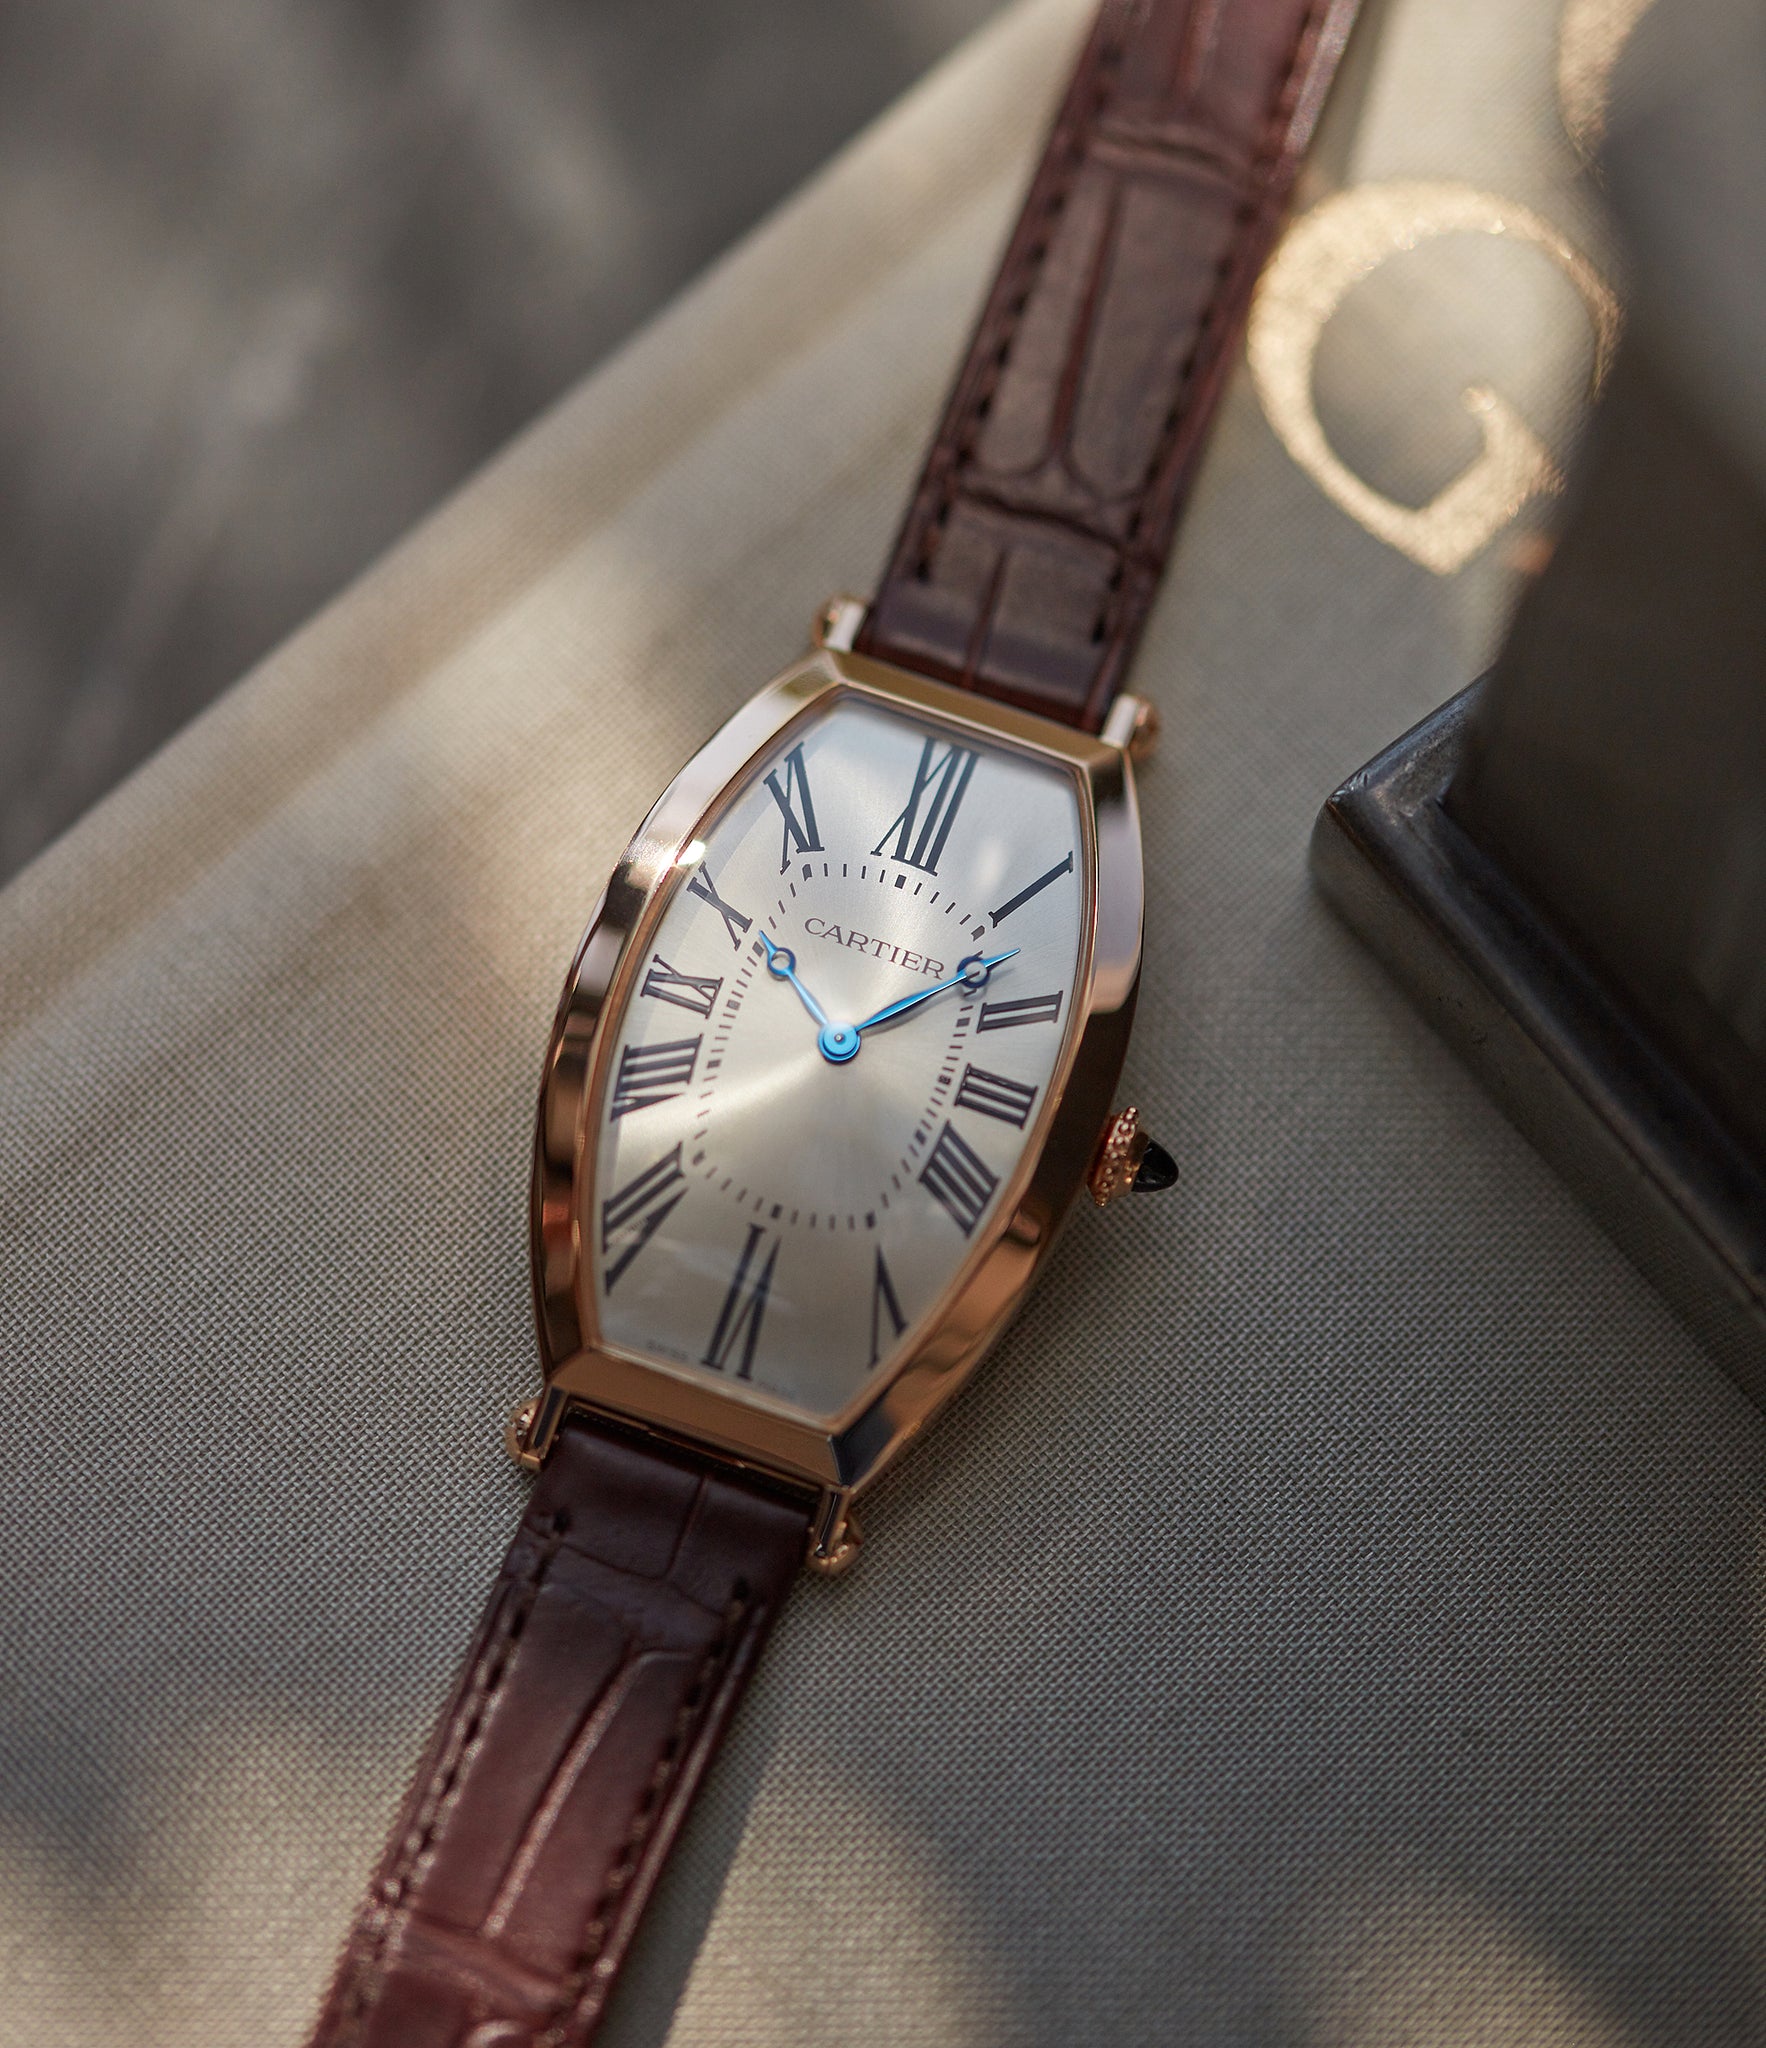 classic Cartier Montre Tonneau rose gold time-only luxury rare dress watch for sale online at A Collected Man London